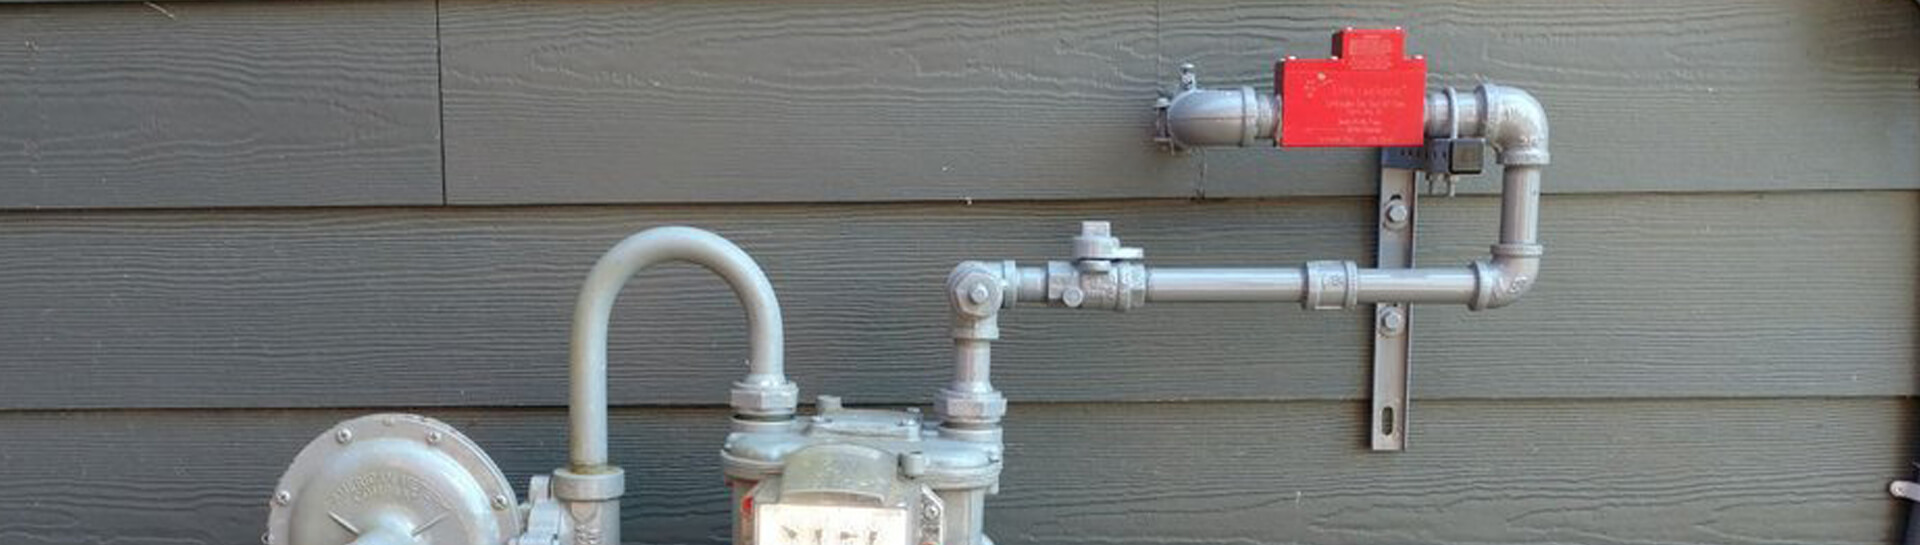 Why Your Home Needs an Earthquake Shut-Off Valve